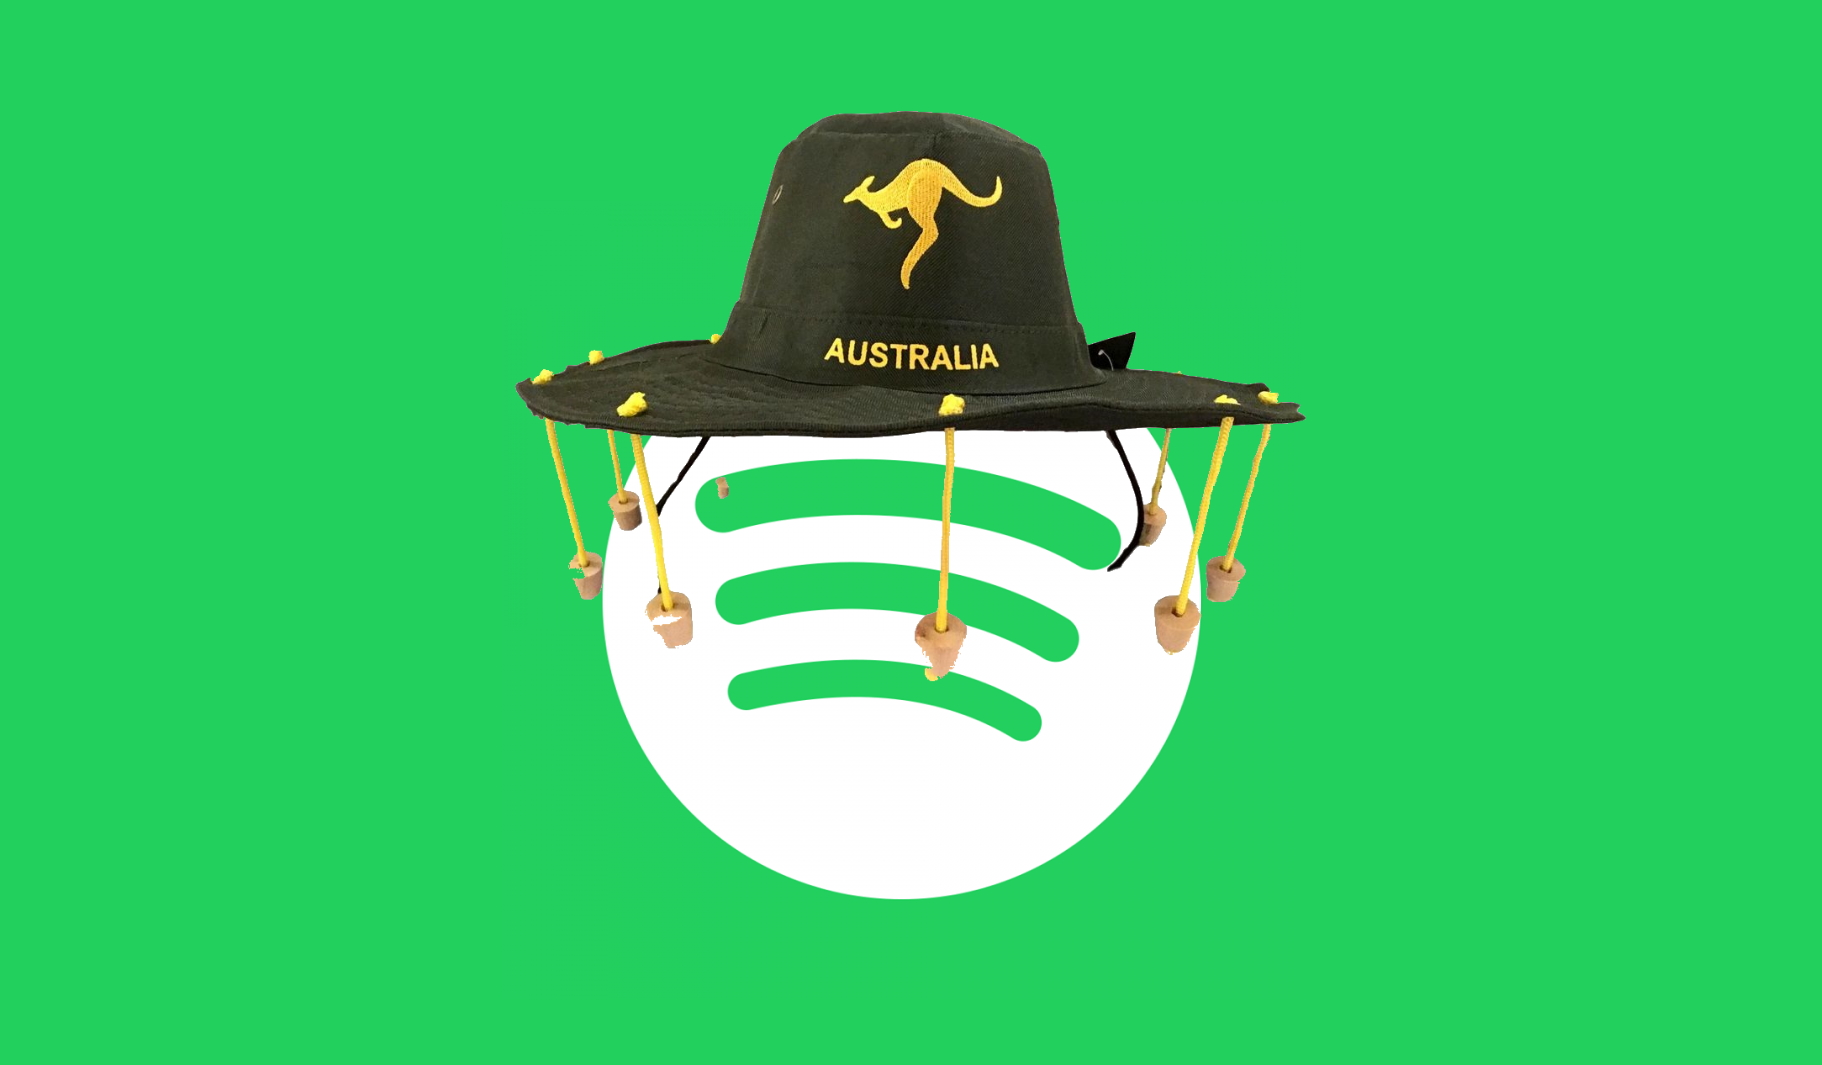 Over 60% of Australians use music streaming services, new report shows